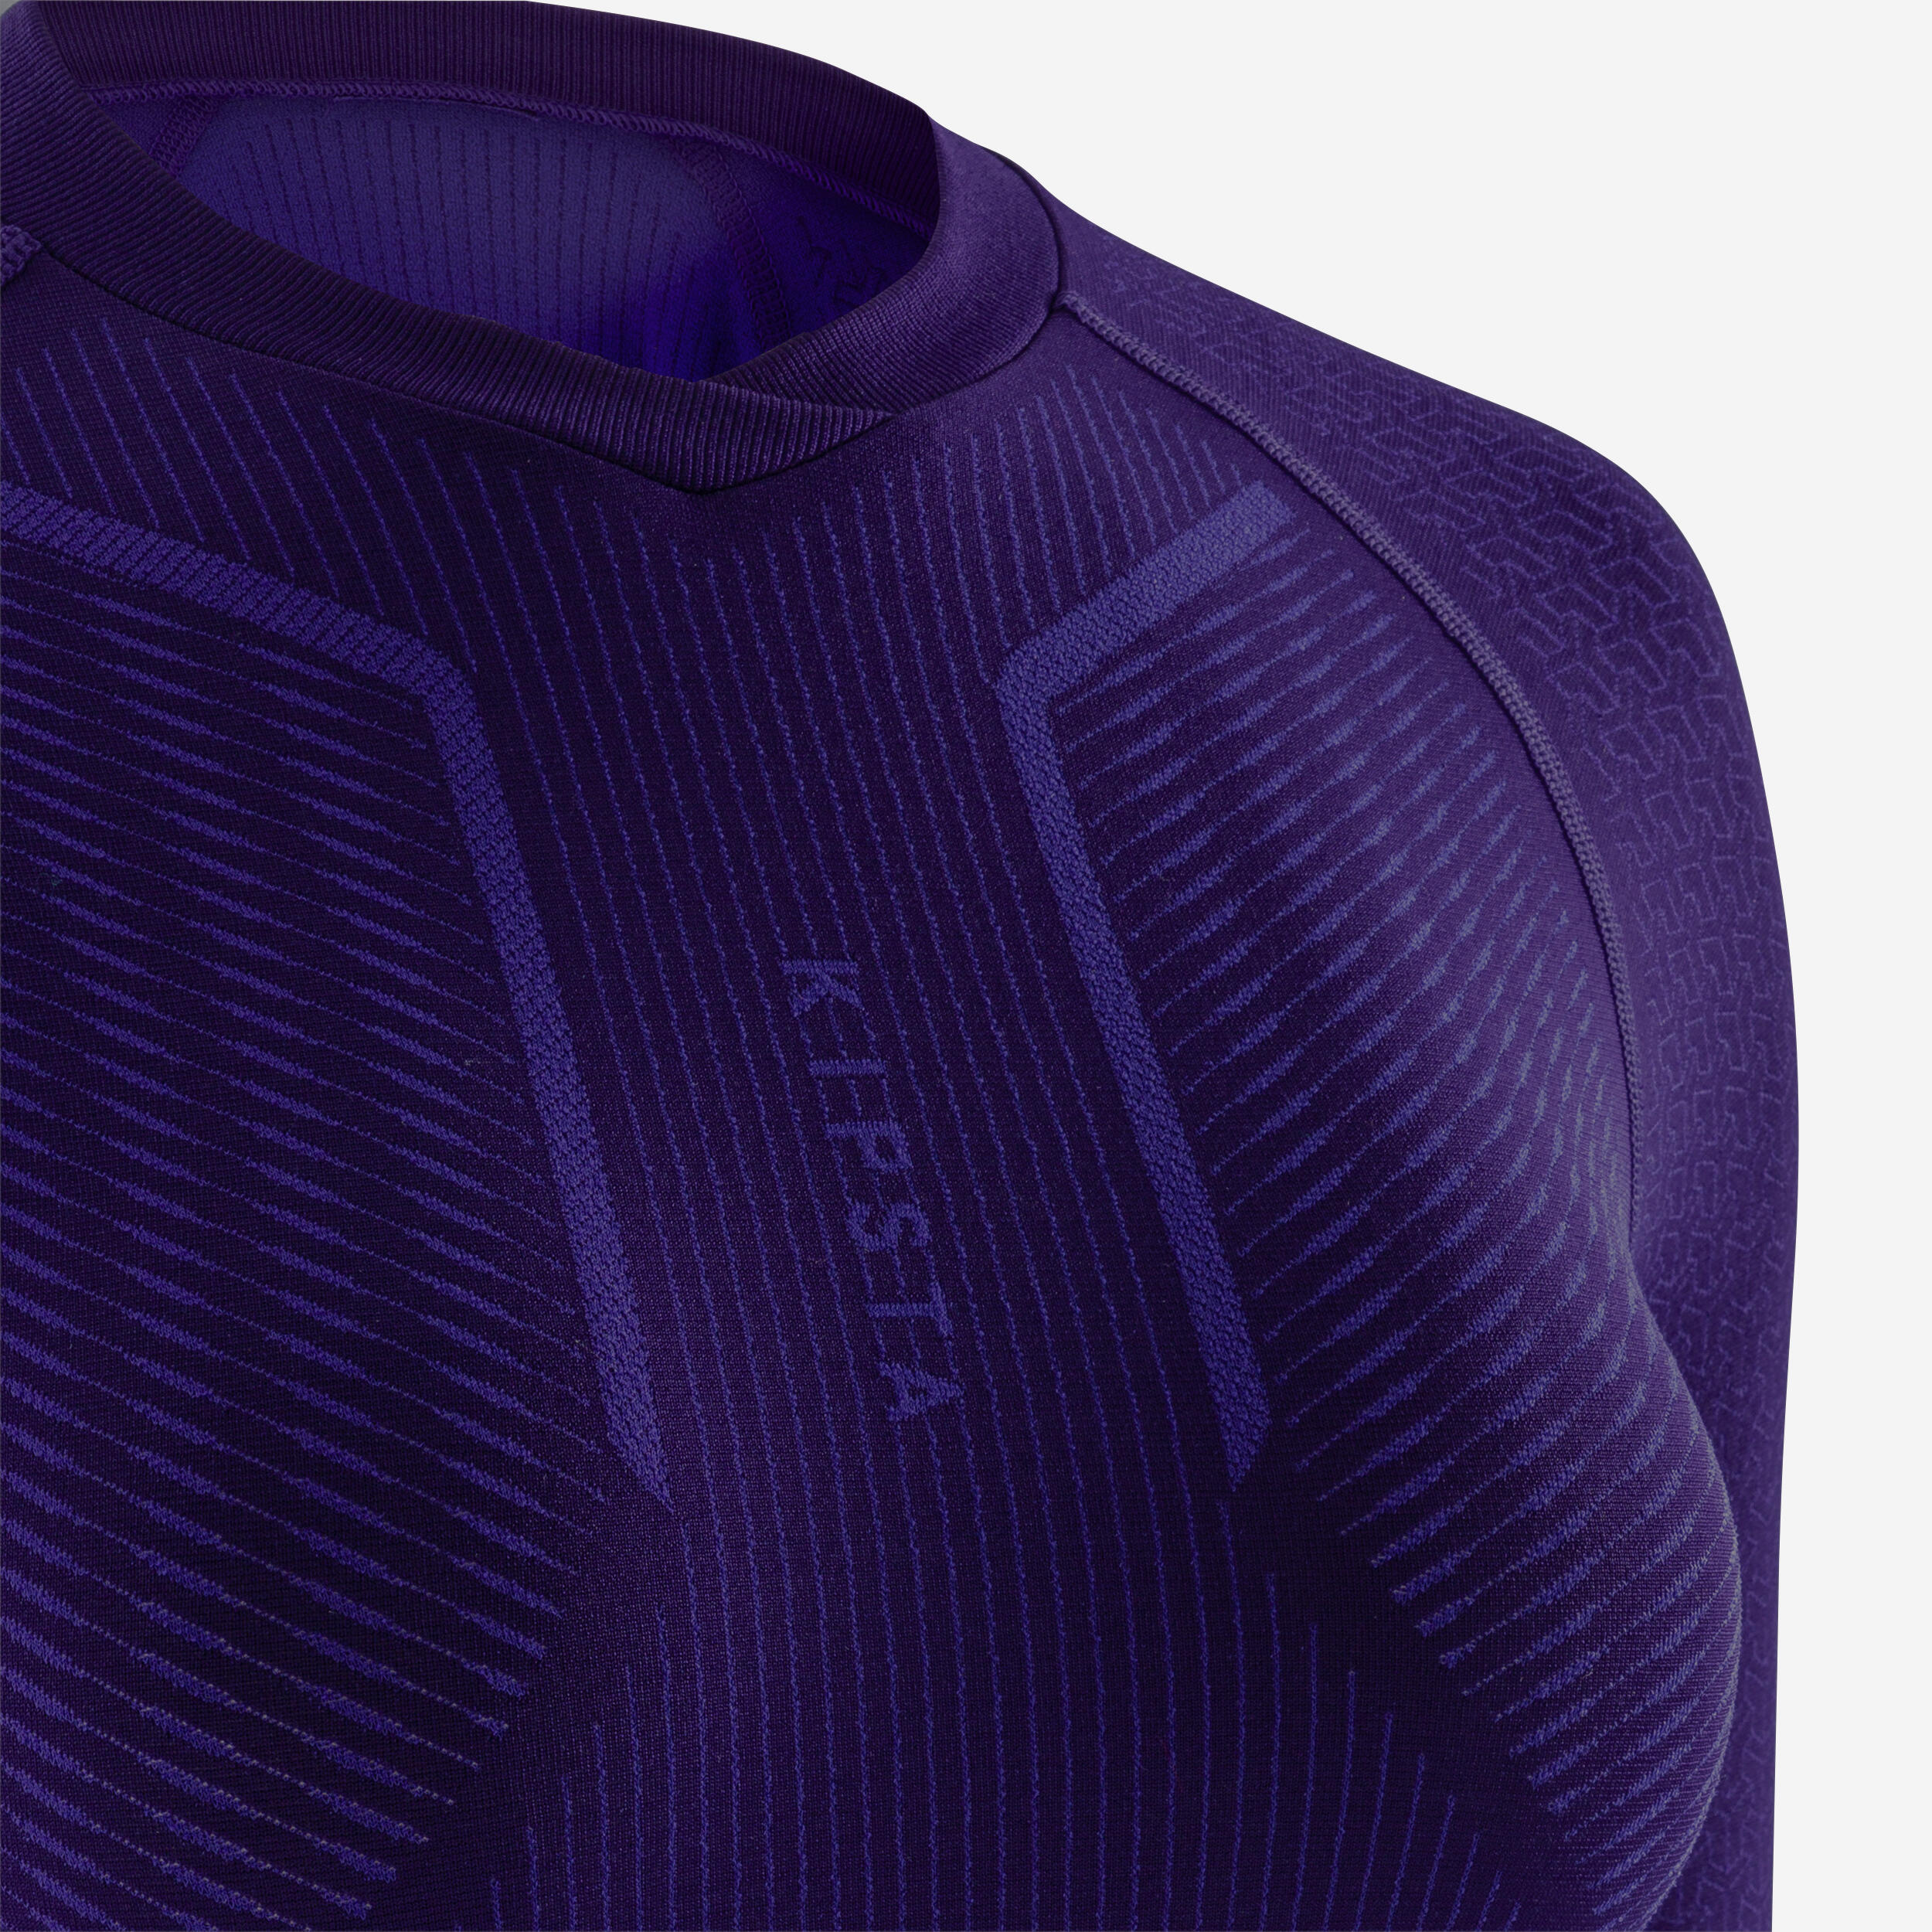 Adult Long-Sleeved Thermal Base Layer Top Keepdry 500 - Purple 12/15